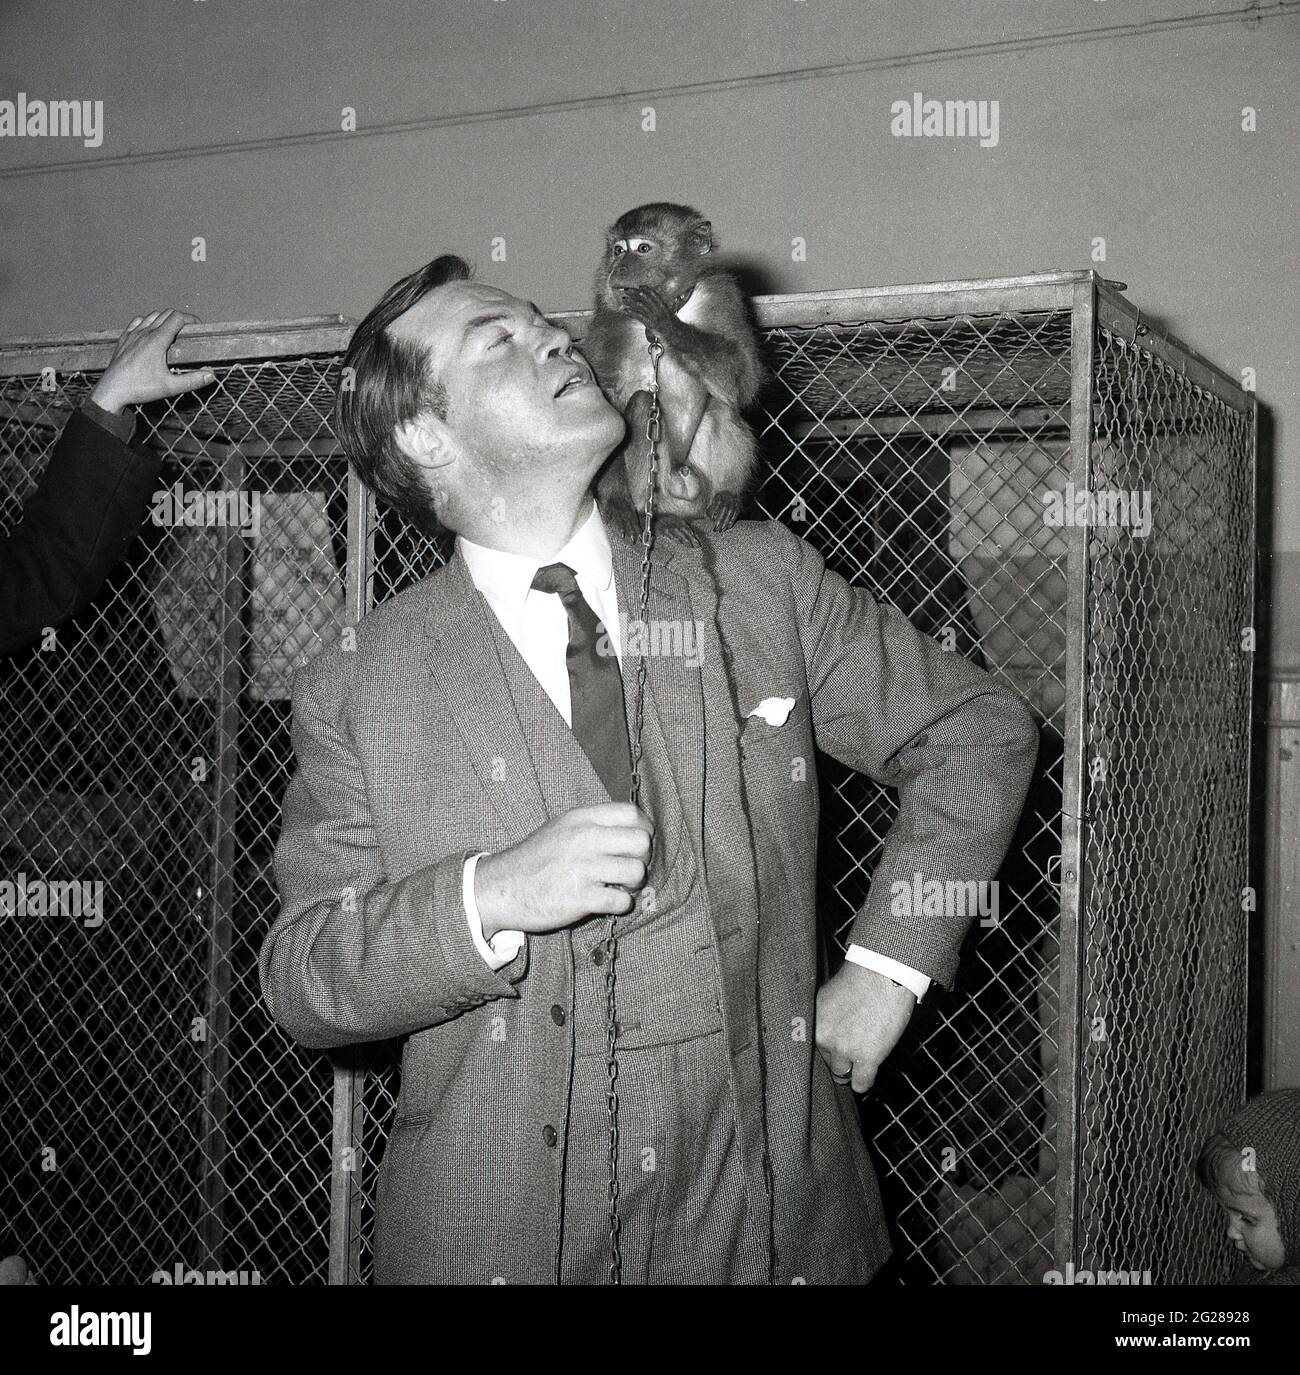 1960s, historical, infront of a metal cage, well dressed man in a three piece check patterned suit with a small monkey on his shoulder, Scotland, UK. Bill Tennent was a leading personality in the early years of Scottish Television. He was always ready to turn his hand to anything, including religion, education and documentaries. Several chat shows were built around him, including The Bill Tennent Show and Time Out With Tennent. Stock Photo